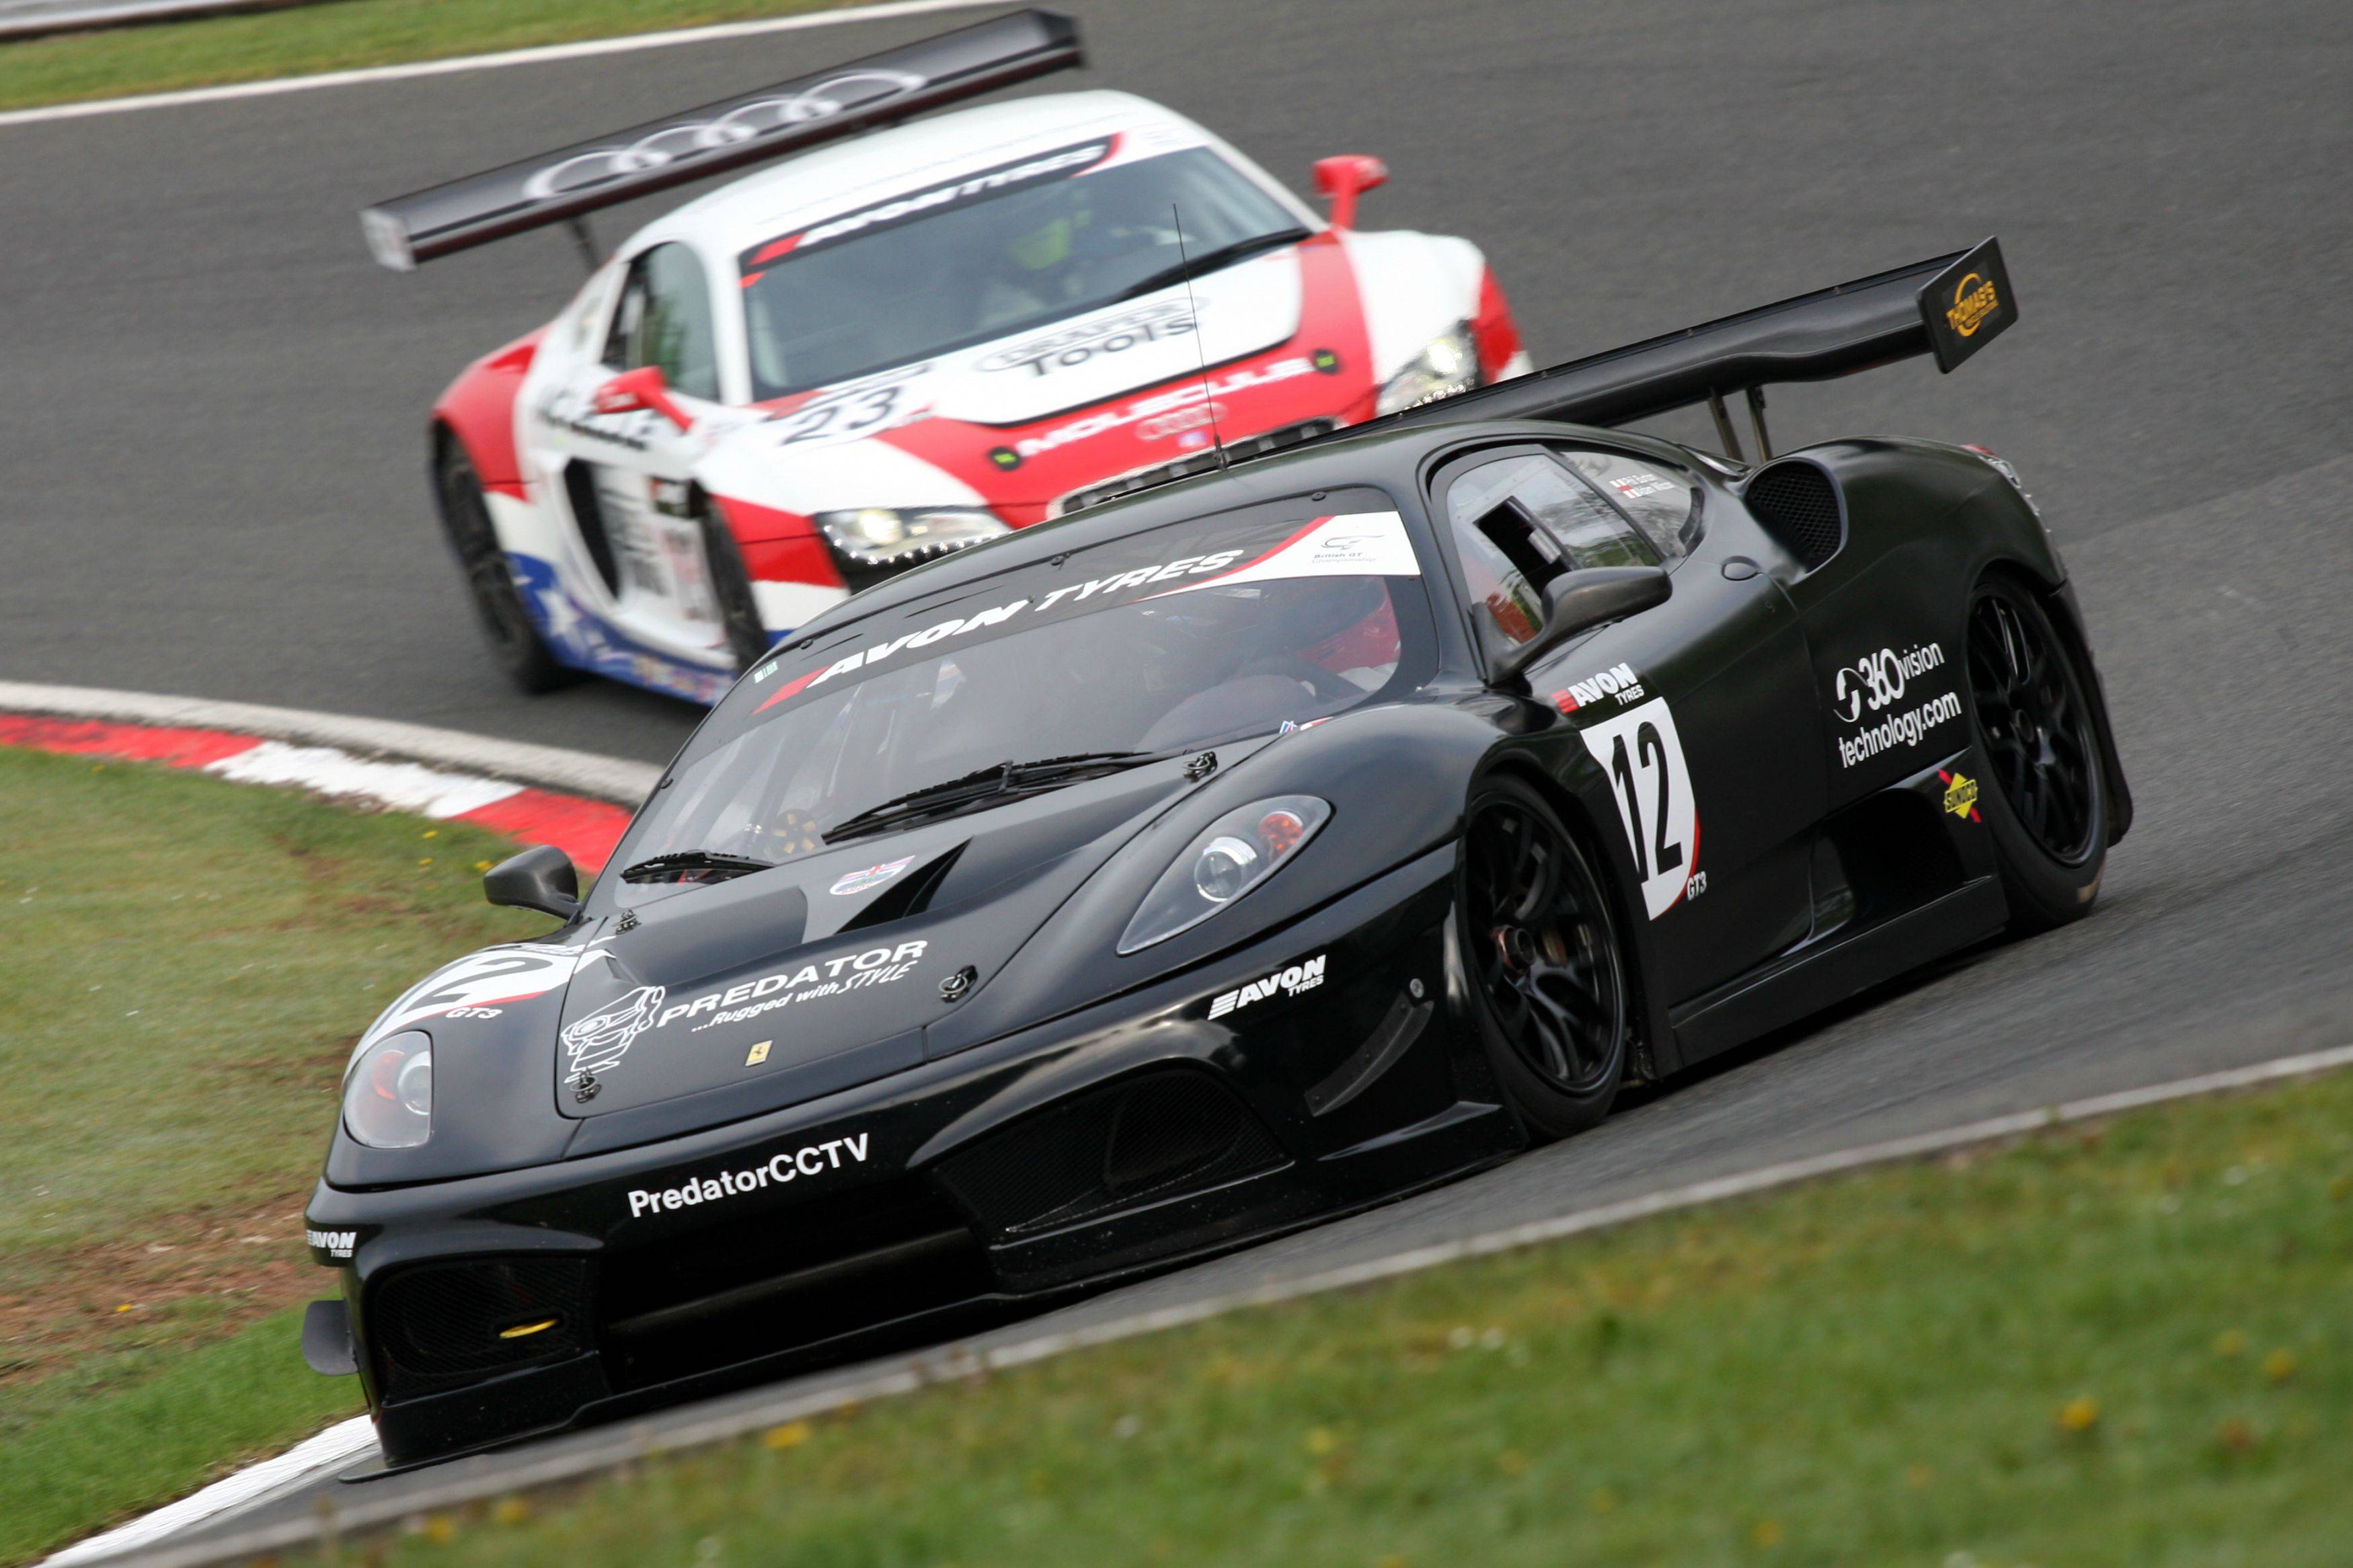 Ferrari F430 tailed by an Audi R8 at the British GT Championship